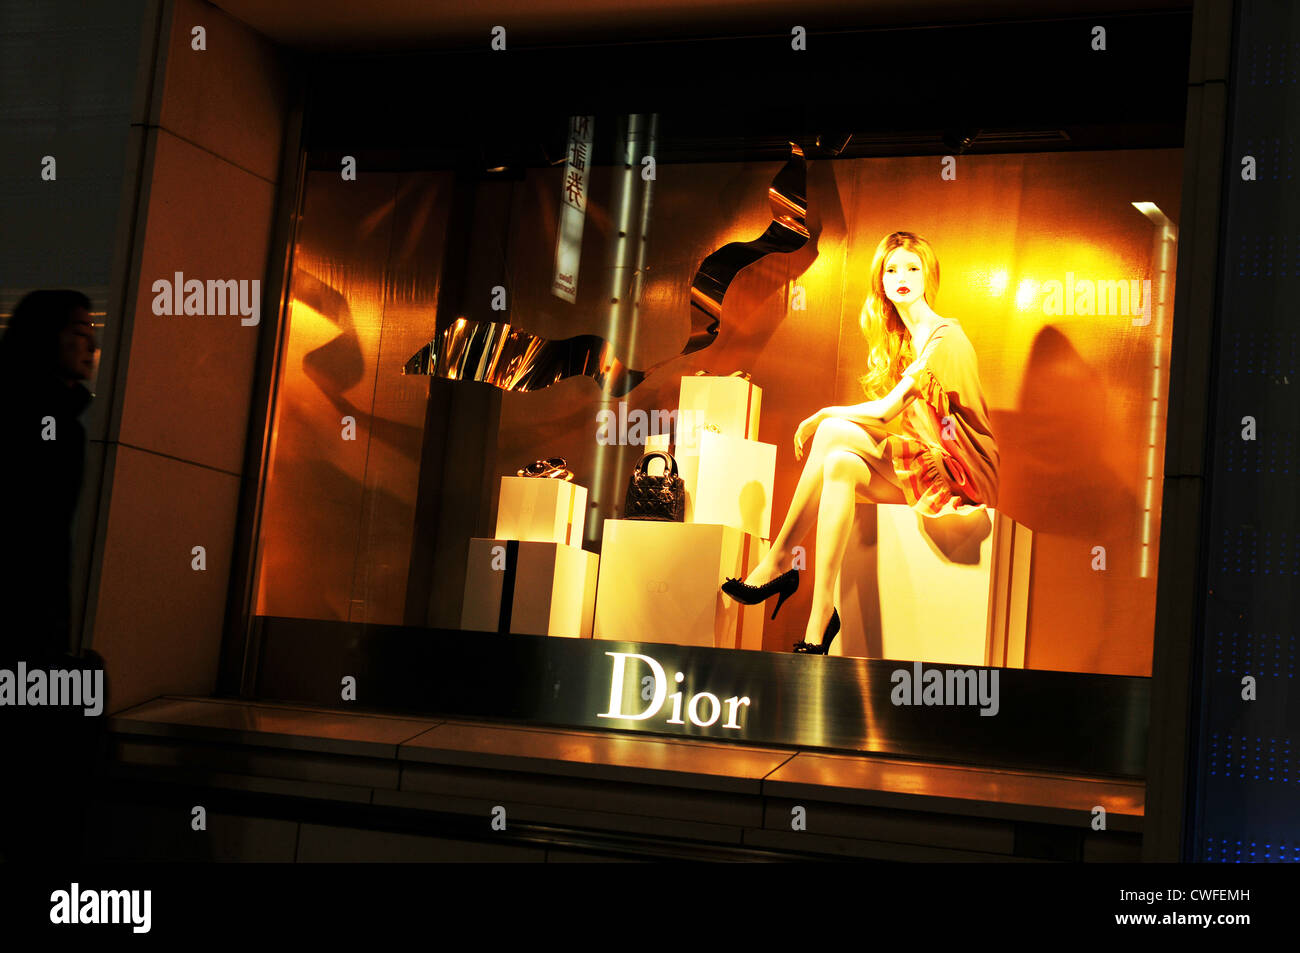 Tokyo, Japan - 28 Dec, 2011: Night view of luxurious Dior shop in Ginza, Tokyo Stock Photo